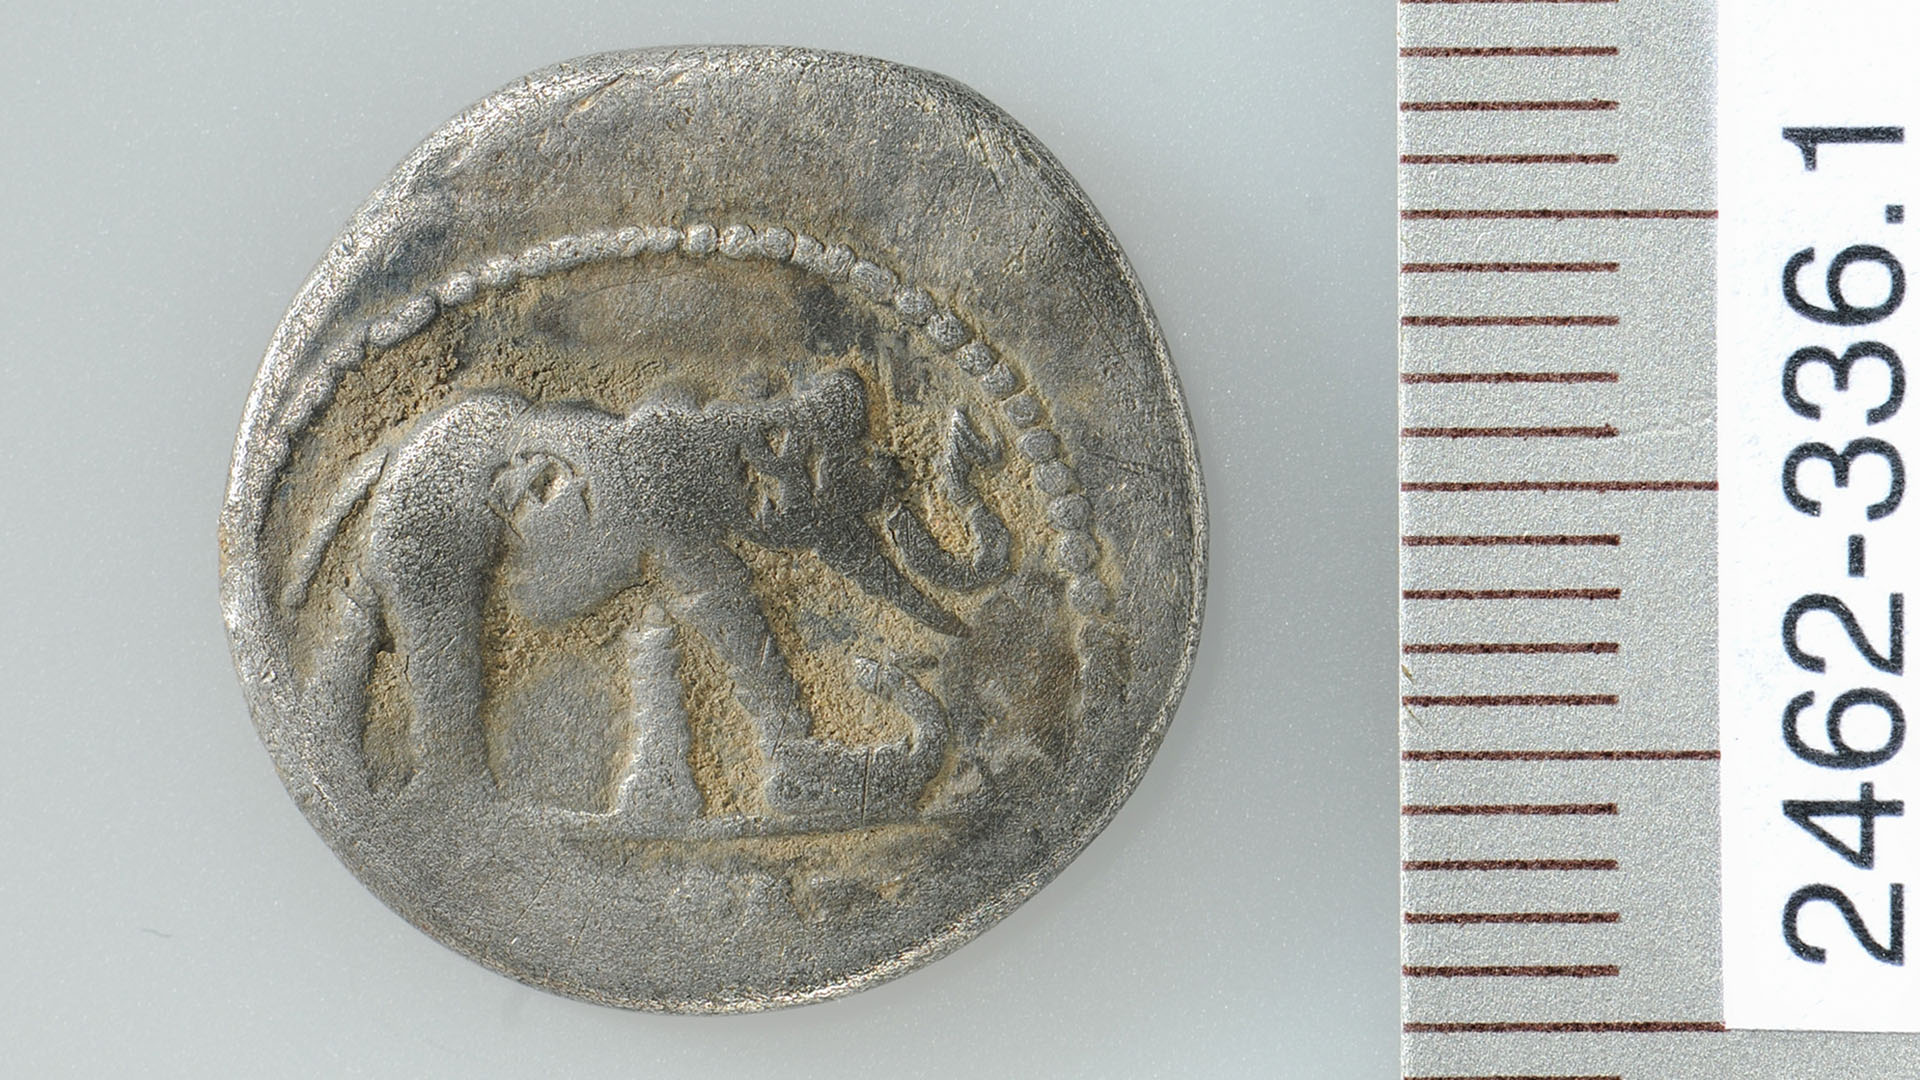 A silver coin showing an elephant trampling a snake or small dragon